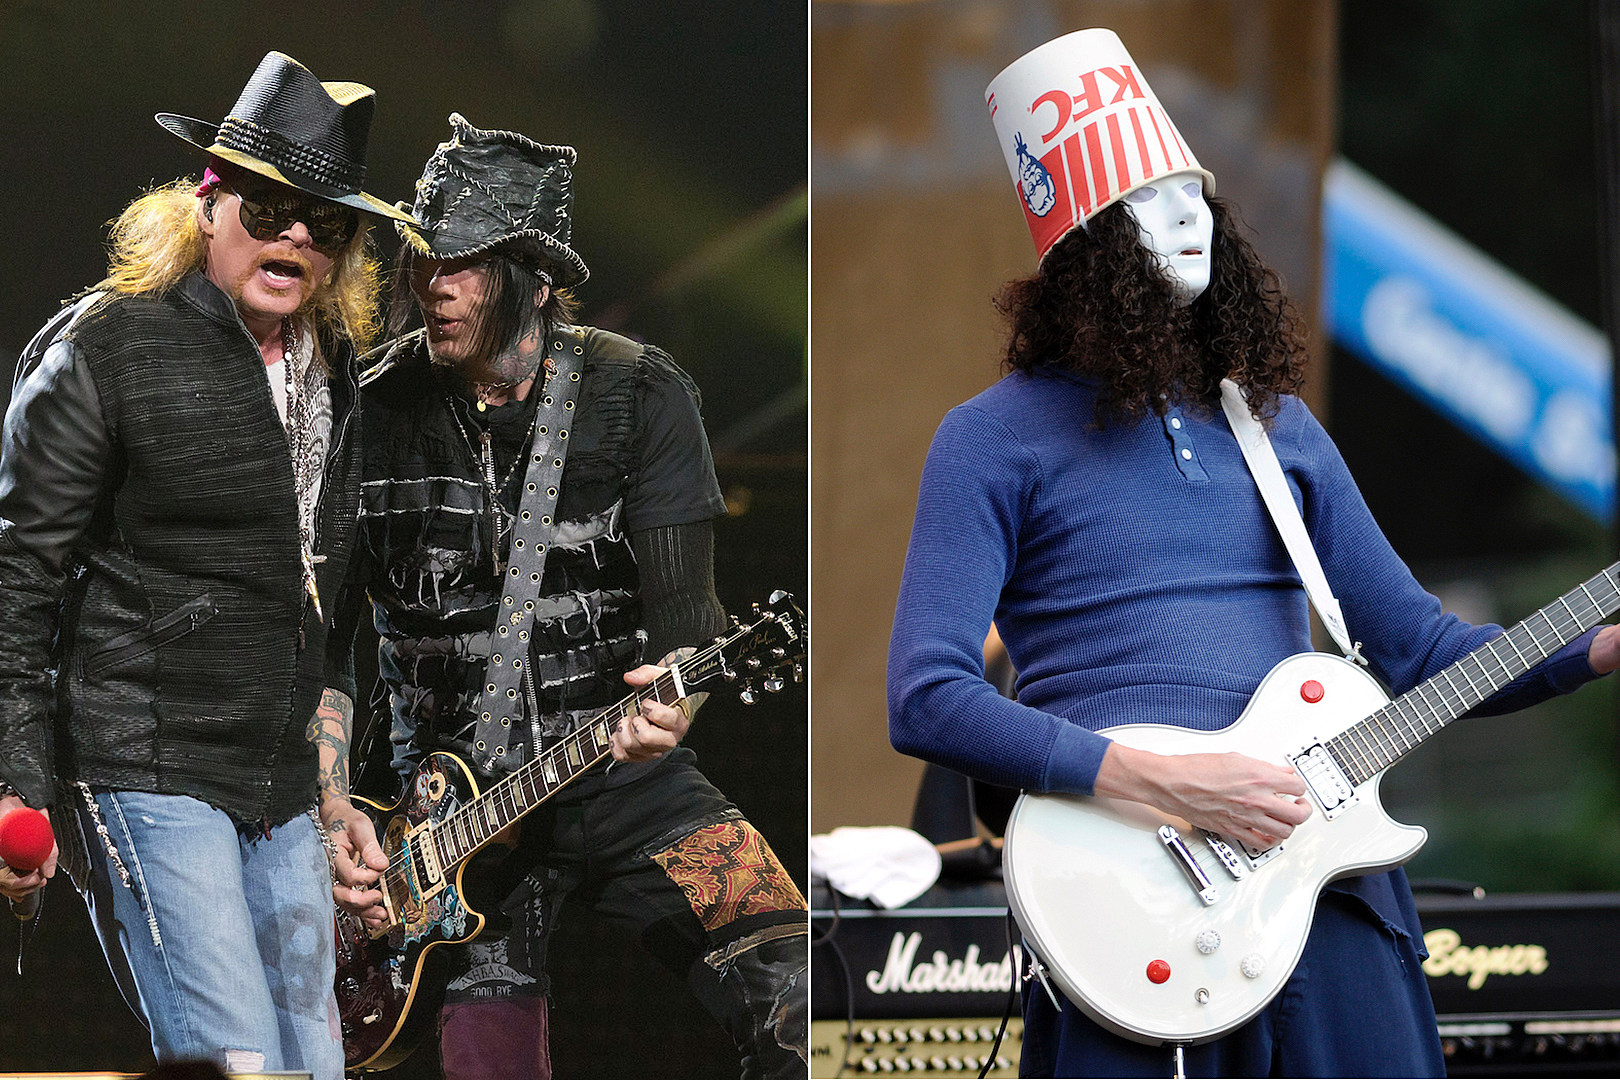 What Does Buckethead Really Look Like?